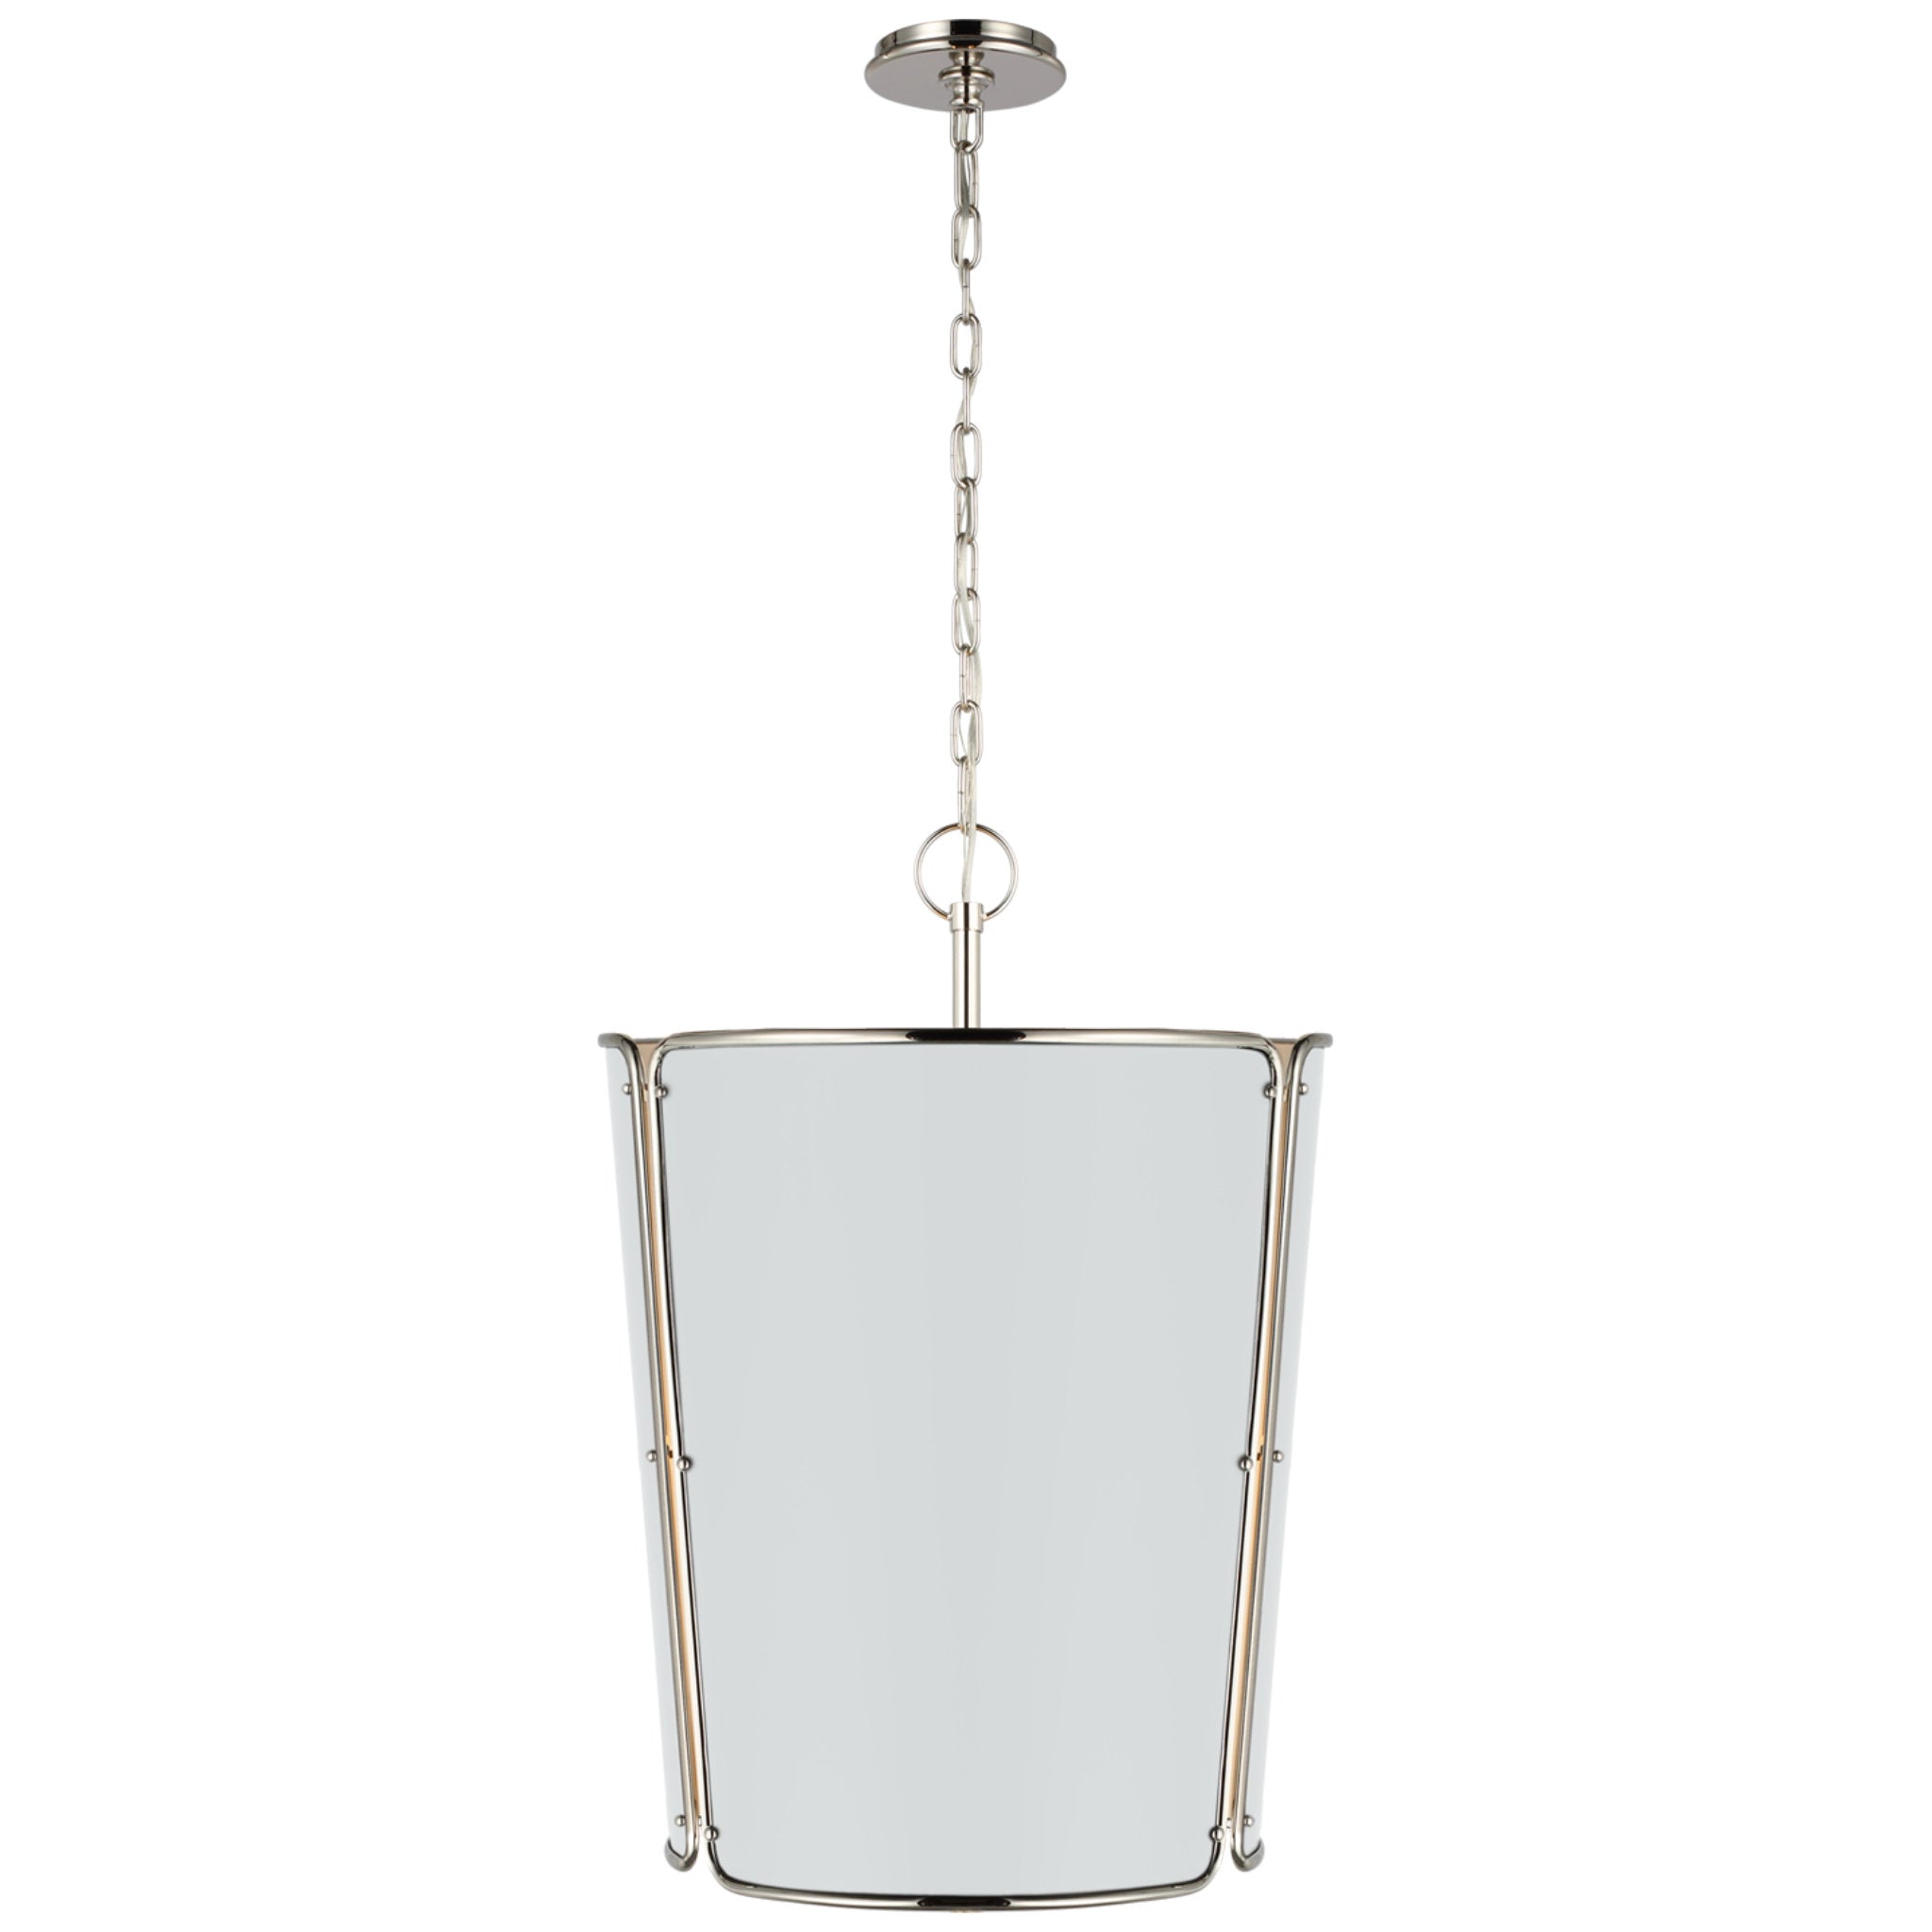 Carrier and Company Hastings Large Pendant in Polished Nickel with White Shade